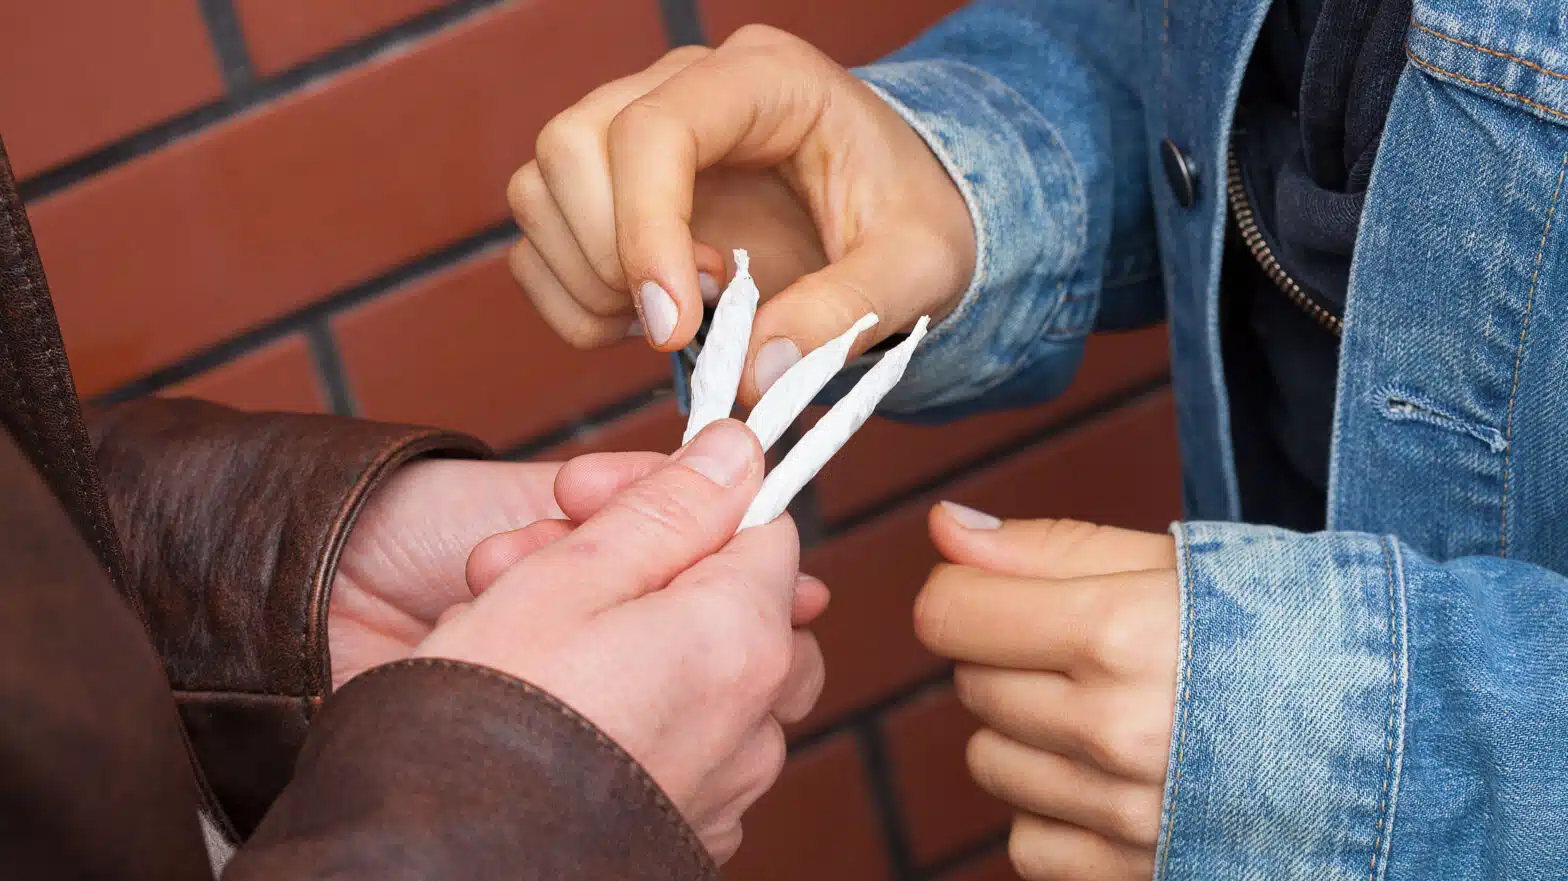 A teen take a joint from his friend's hand - Teen Marijuana Use Linked To Mental Health Risks